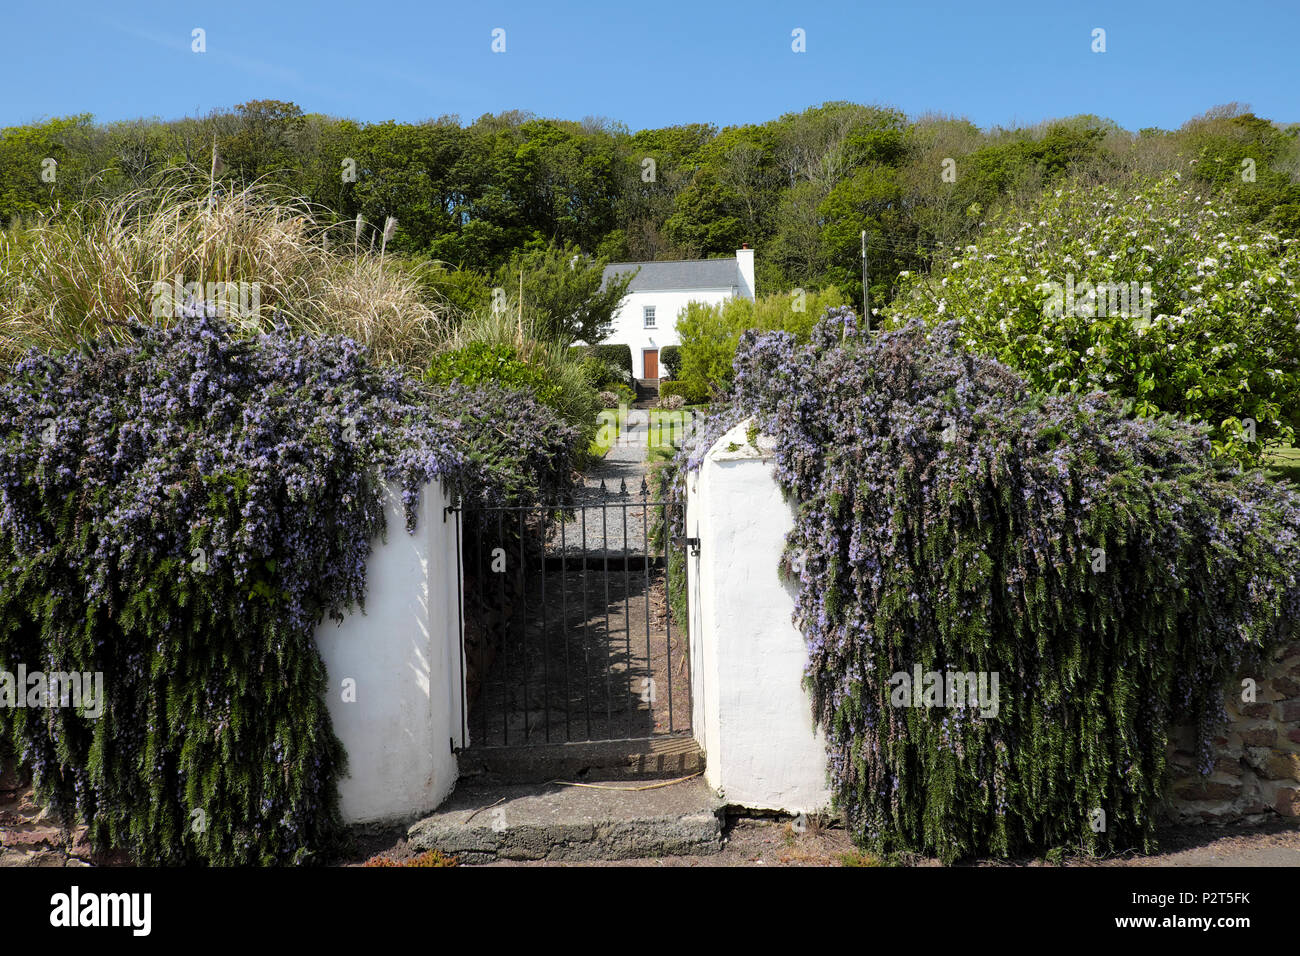 Trailing rosemary herb plant growing on a garden wall by iron gate outside a traditional Welsh cottage in Dale, Pembrokeshire Wales UK KATHY DEWITT Stock Photo